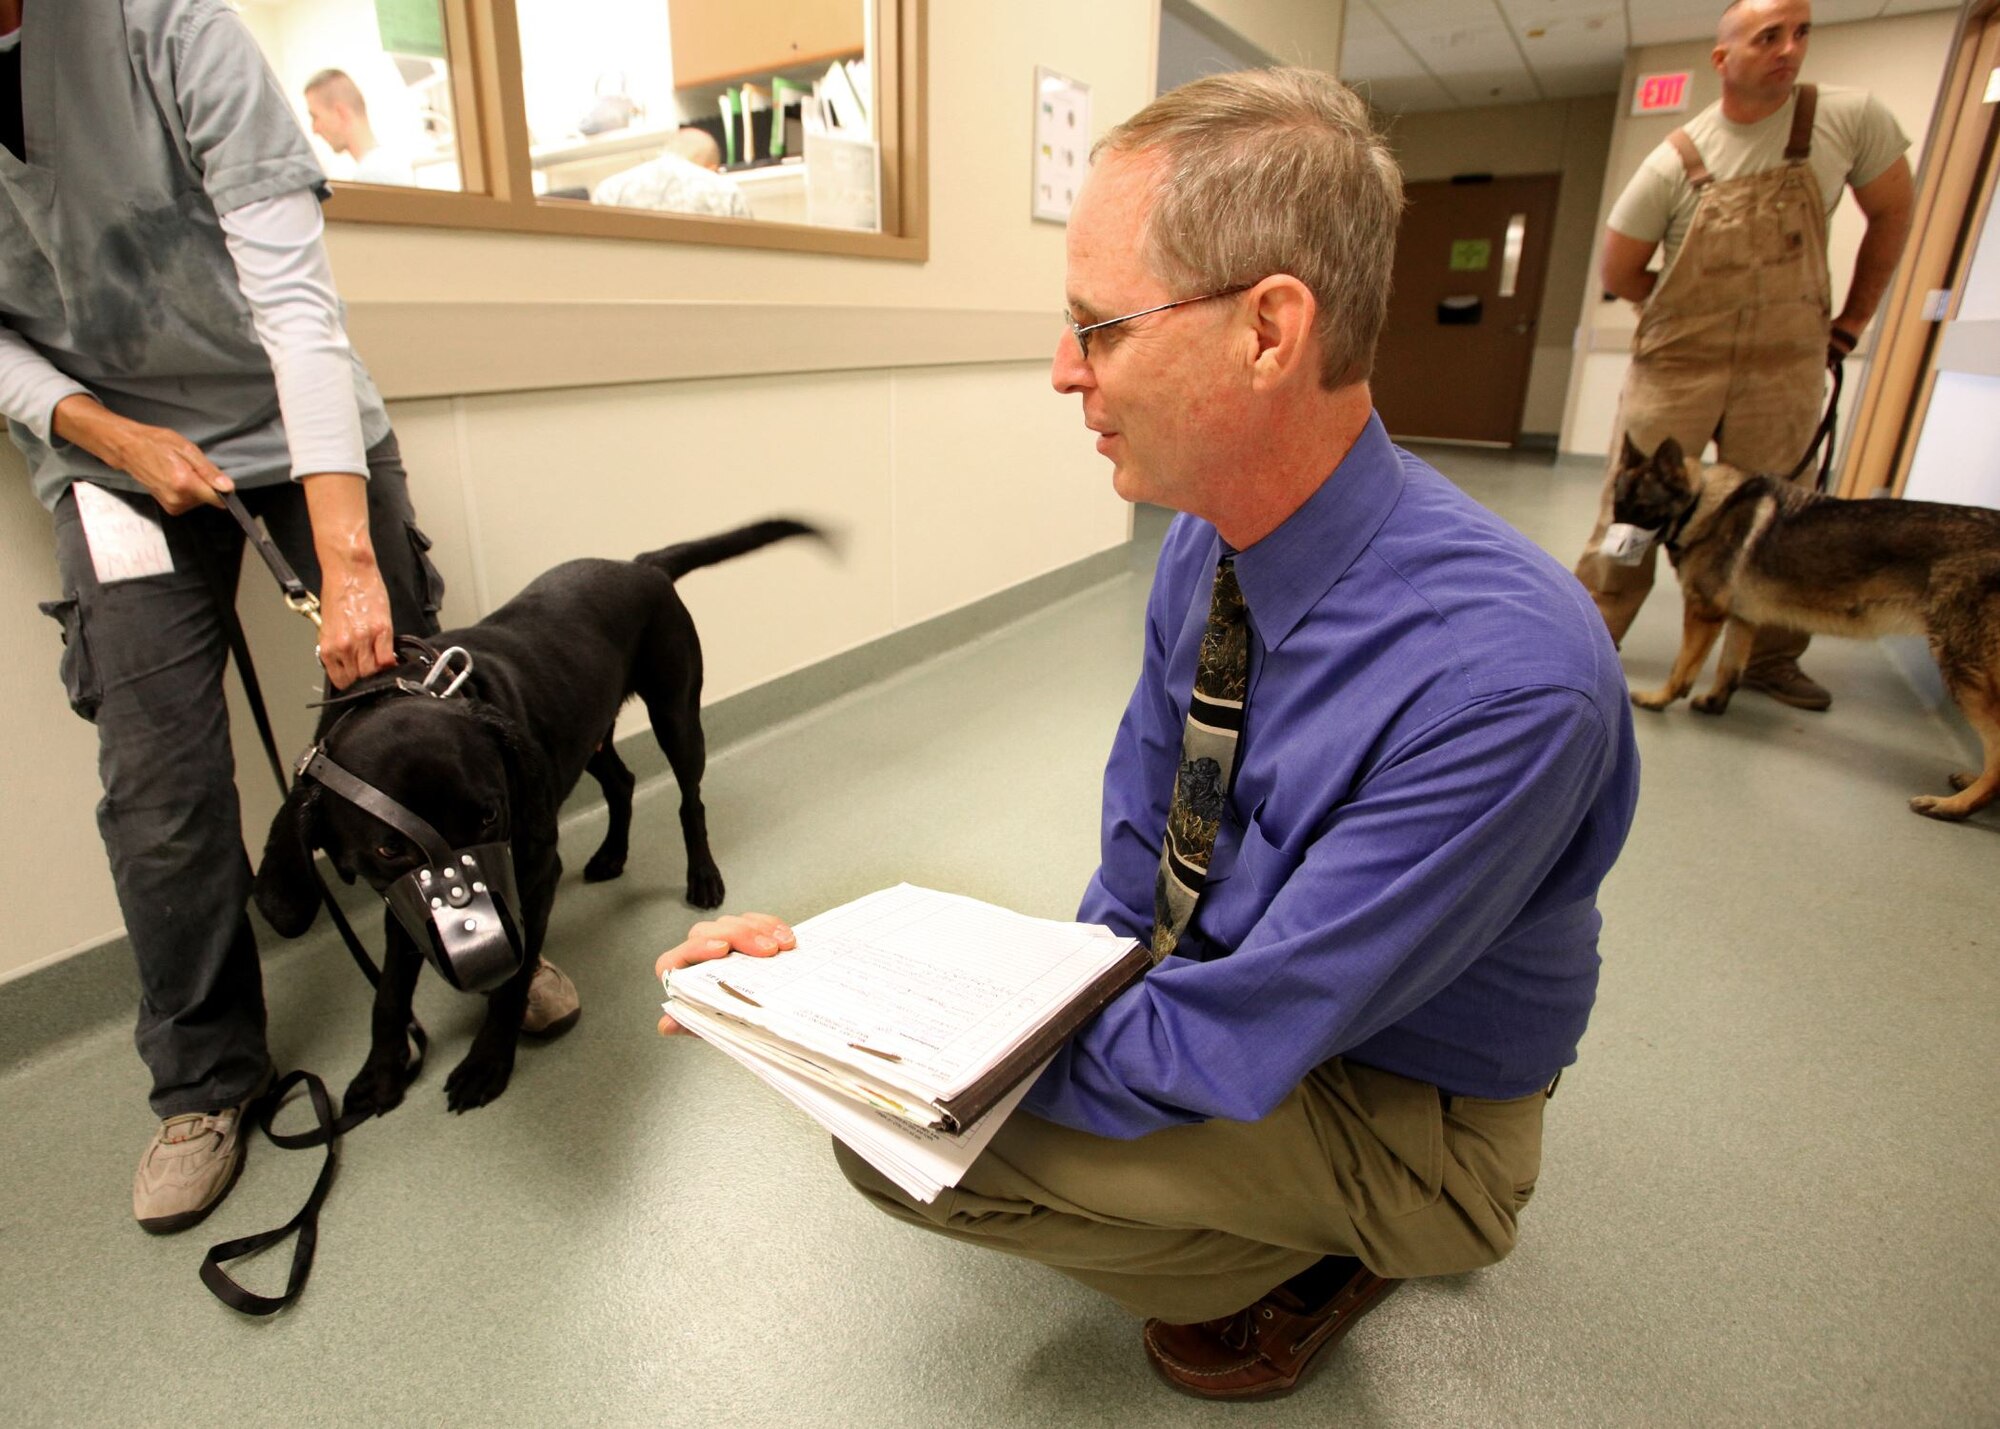 Dr. Walter F. Burghardt Jr. evaluates the behavior of a military working dog. Burghardt is the chief of Behavioral Medicine and Military Working Dog Studies at LTC Daniel E. Holland Memorial Military Working Dog Hospital at Joint Base San Antonio-Lackland.